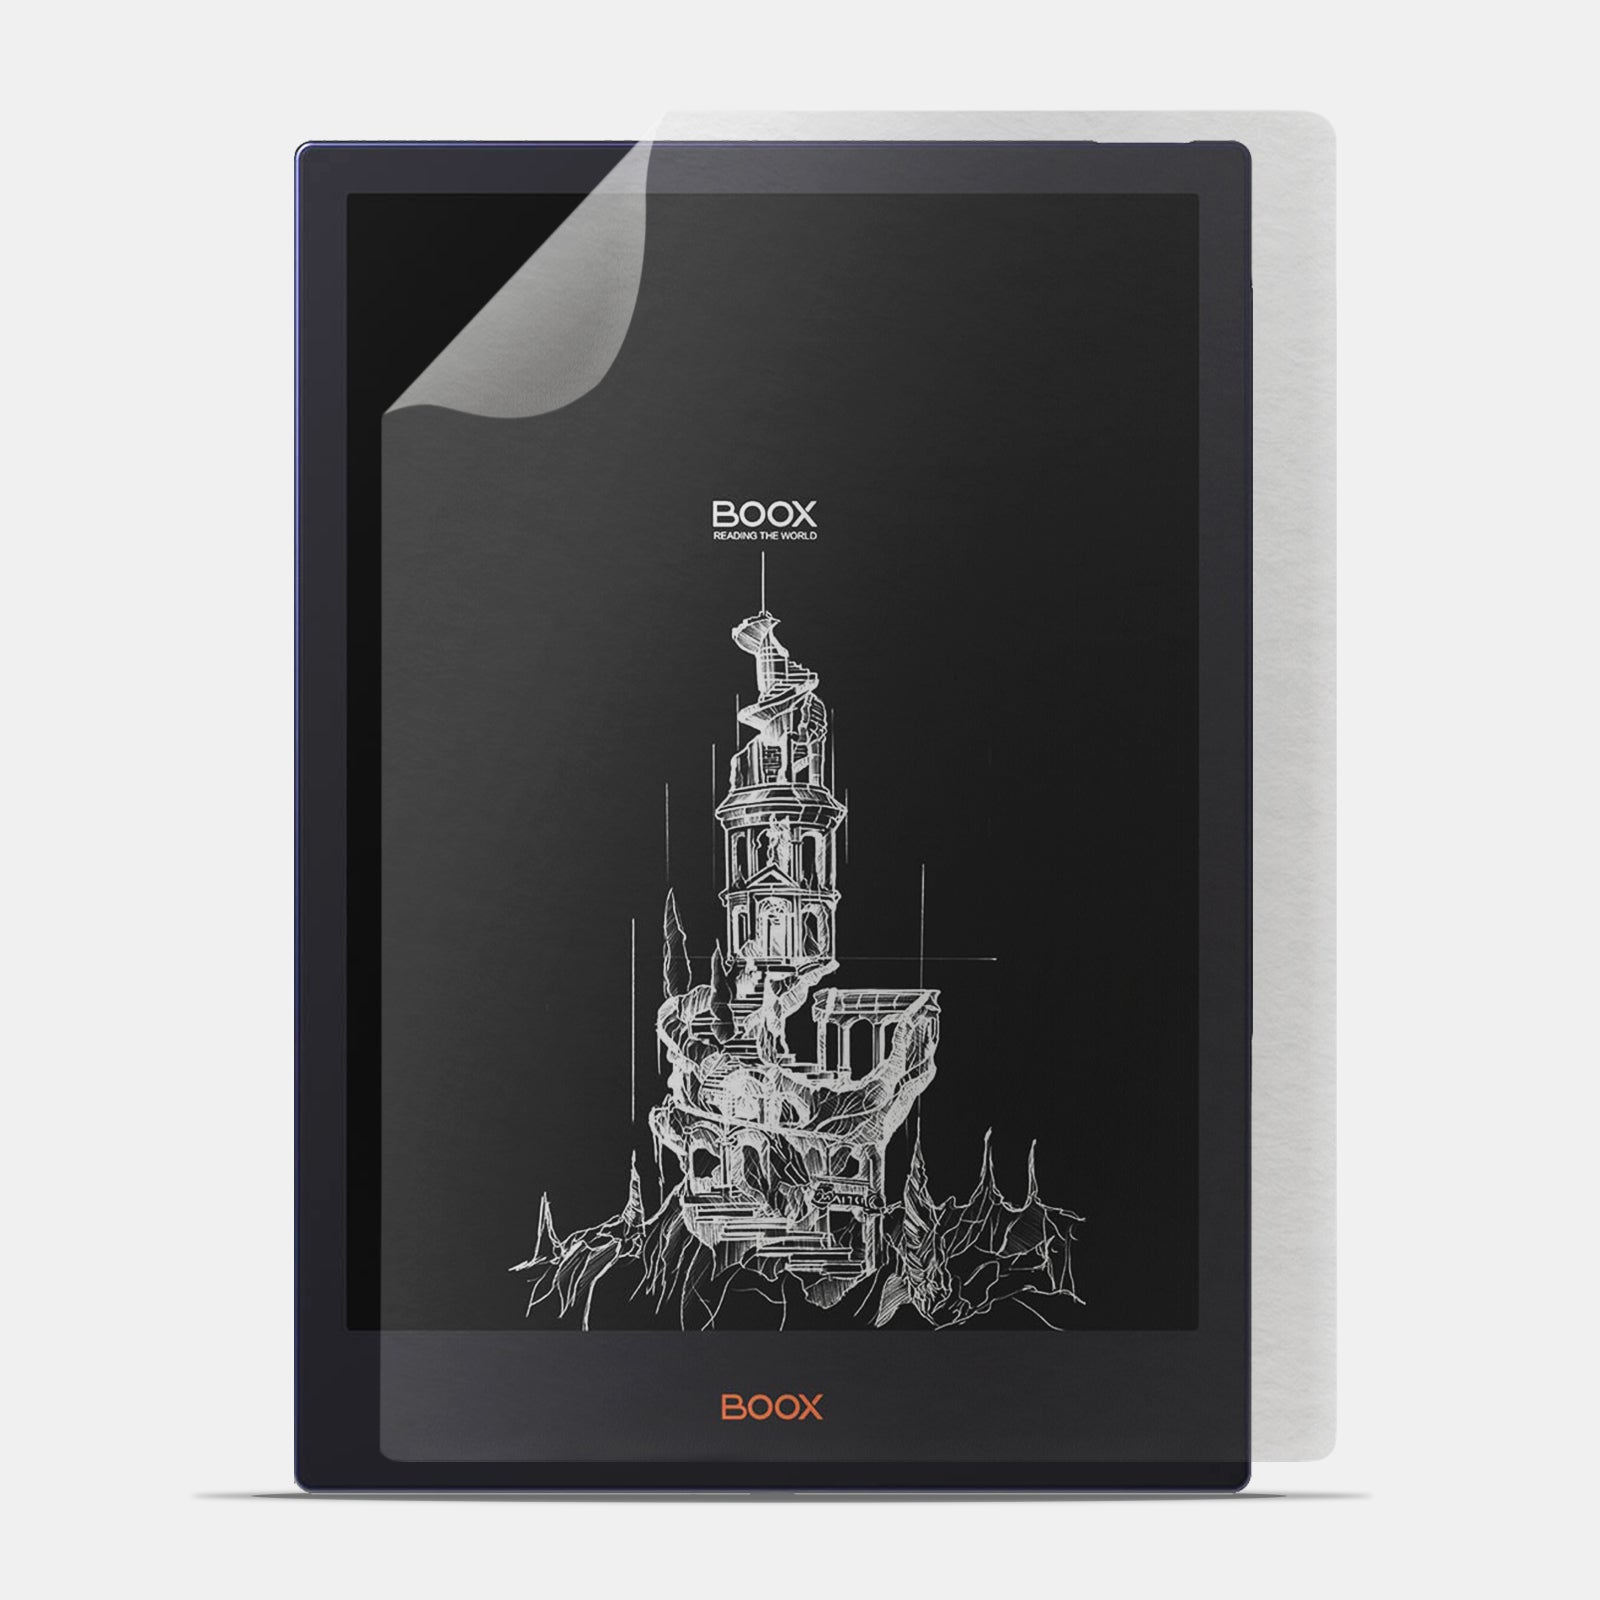 Discover the screen protectors for Onyx BOOX now on the doodroo